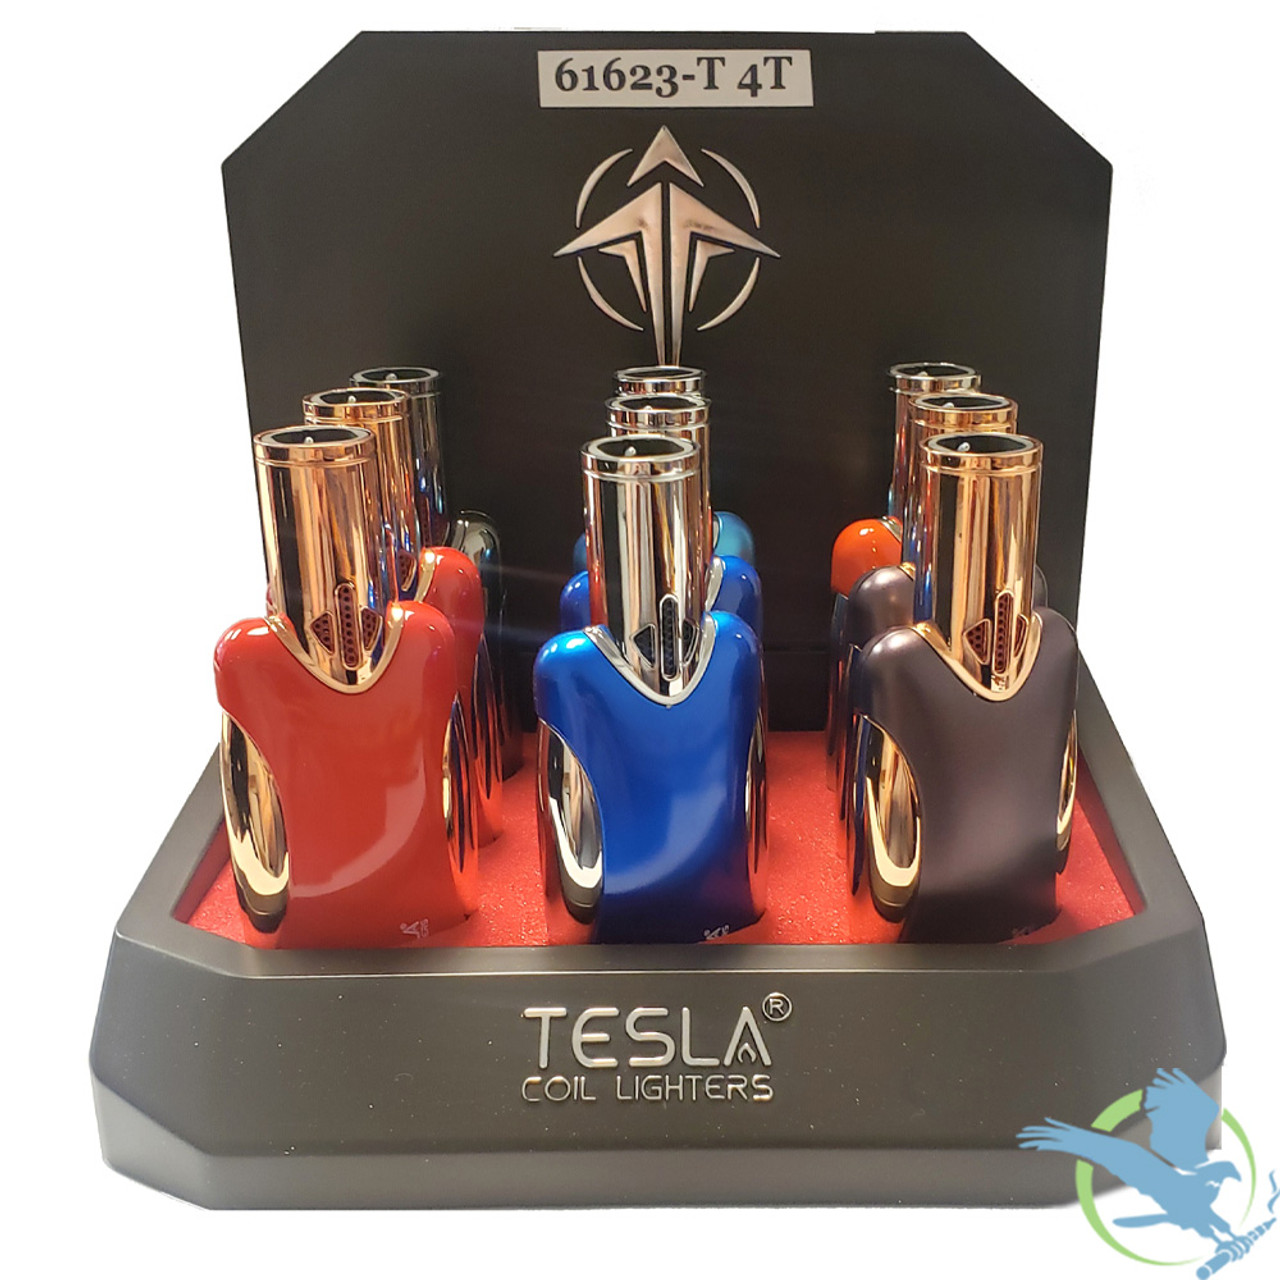 Tesla Coil Lighters 4Torch Straight Shooter Neon Quad Flame Adjustable  Butane Torch Lighter - Assorted Colors - Display of 9 [61623-T] (MSRP  $15.00